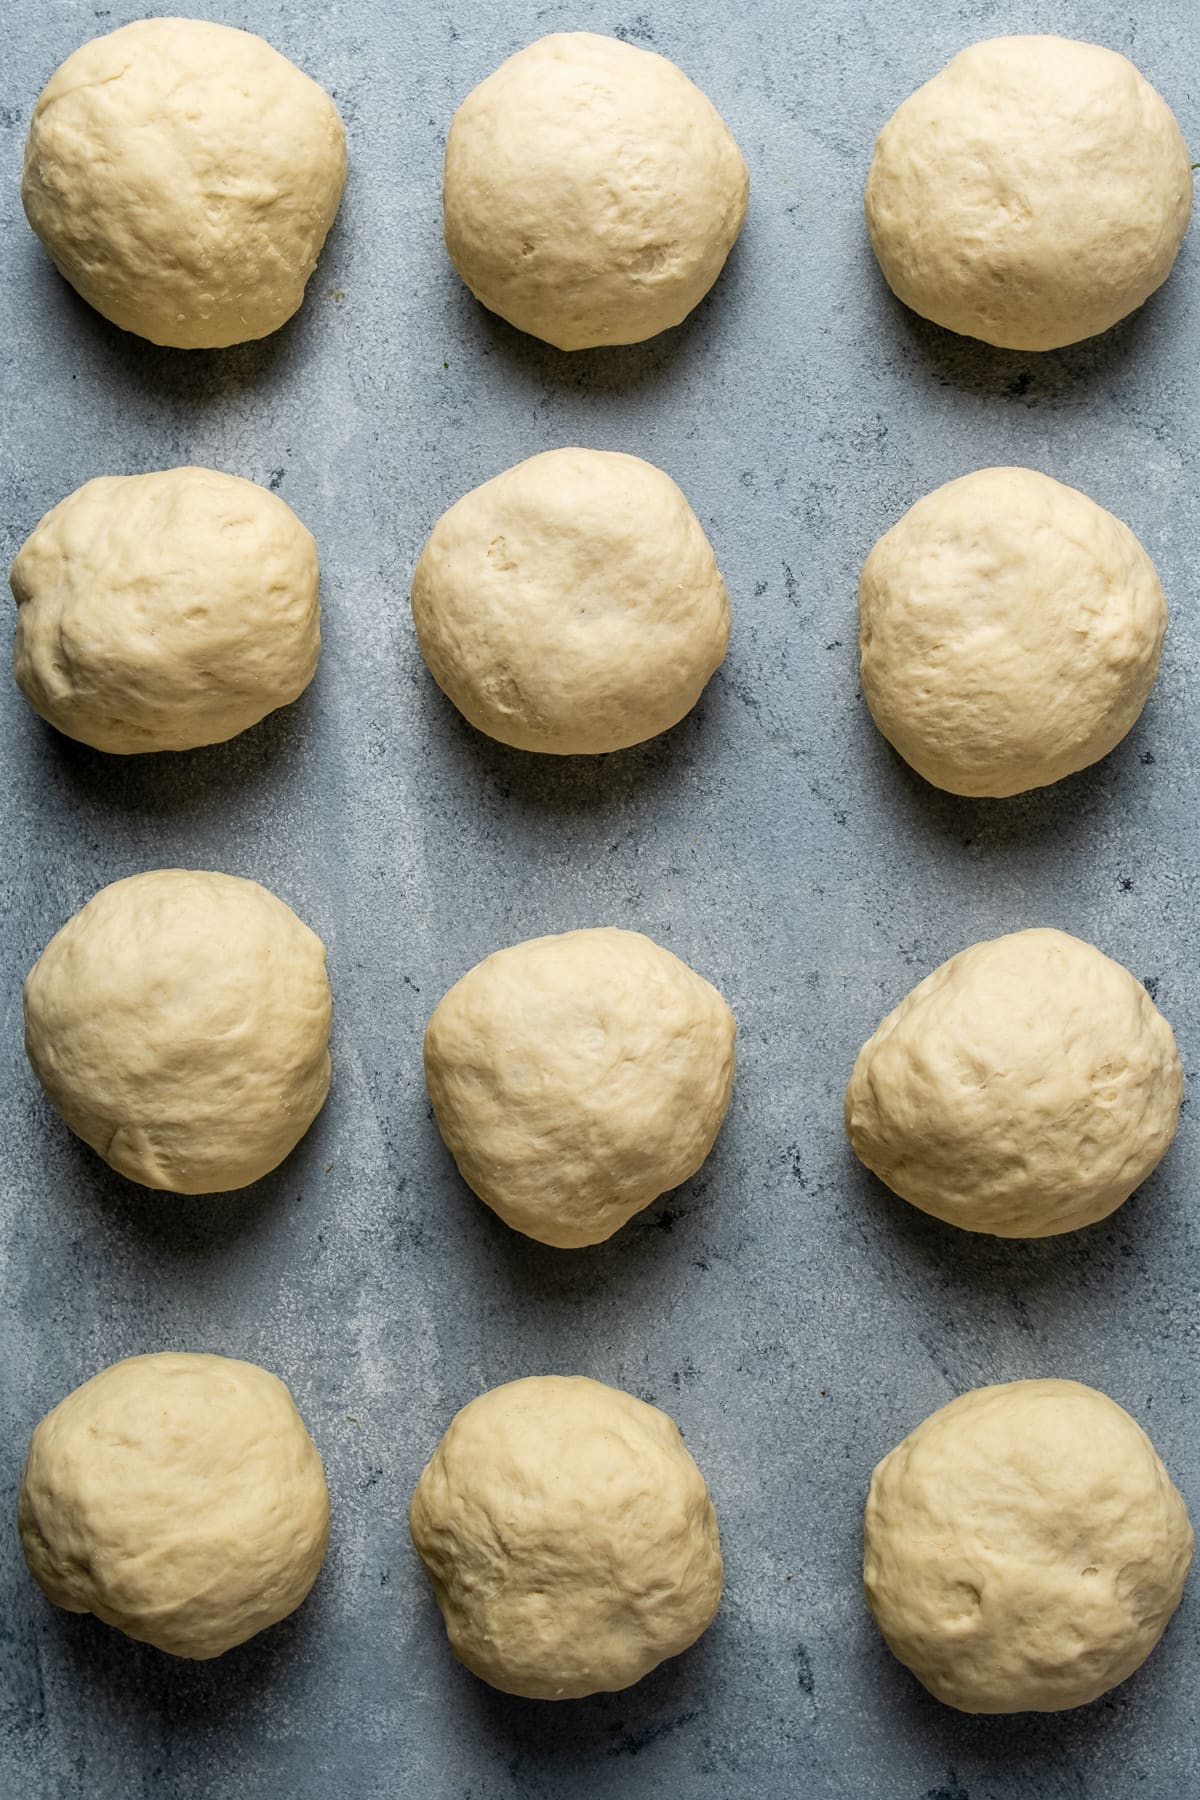 Twelve mini dough balls are aligned in four rows and three coloumns on a grey background.